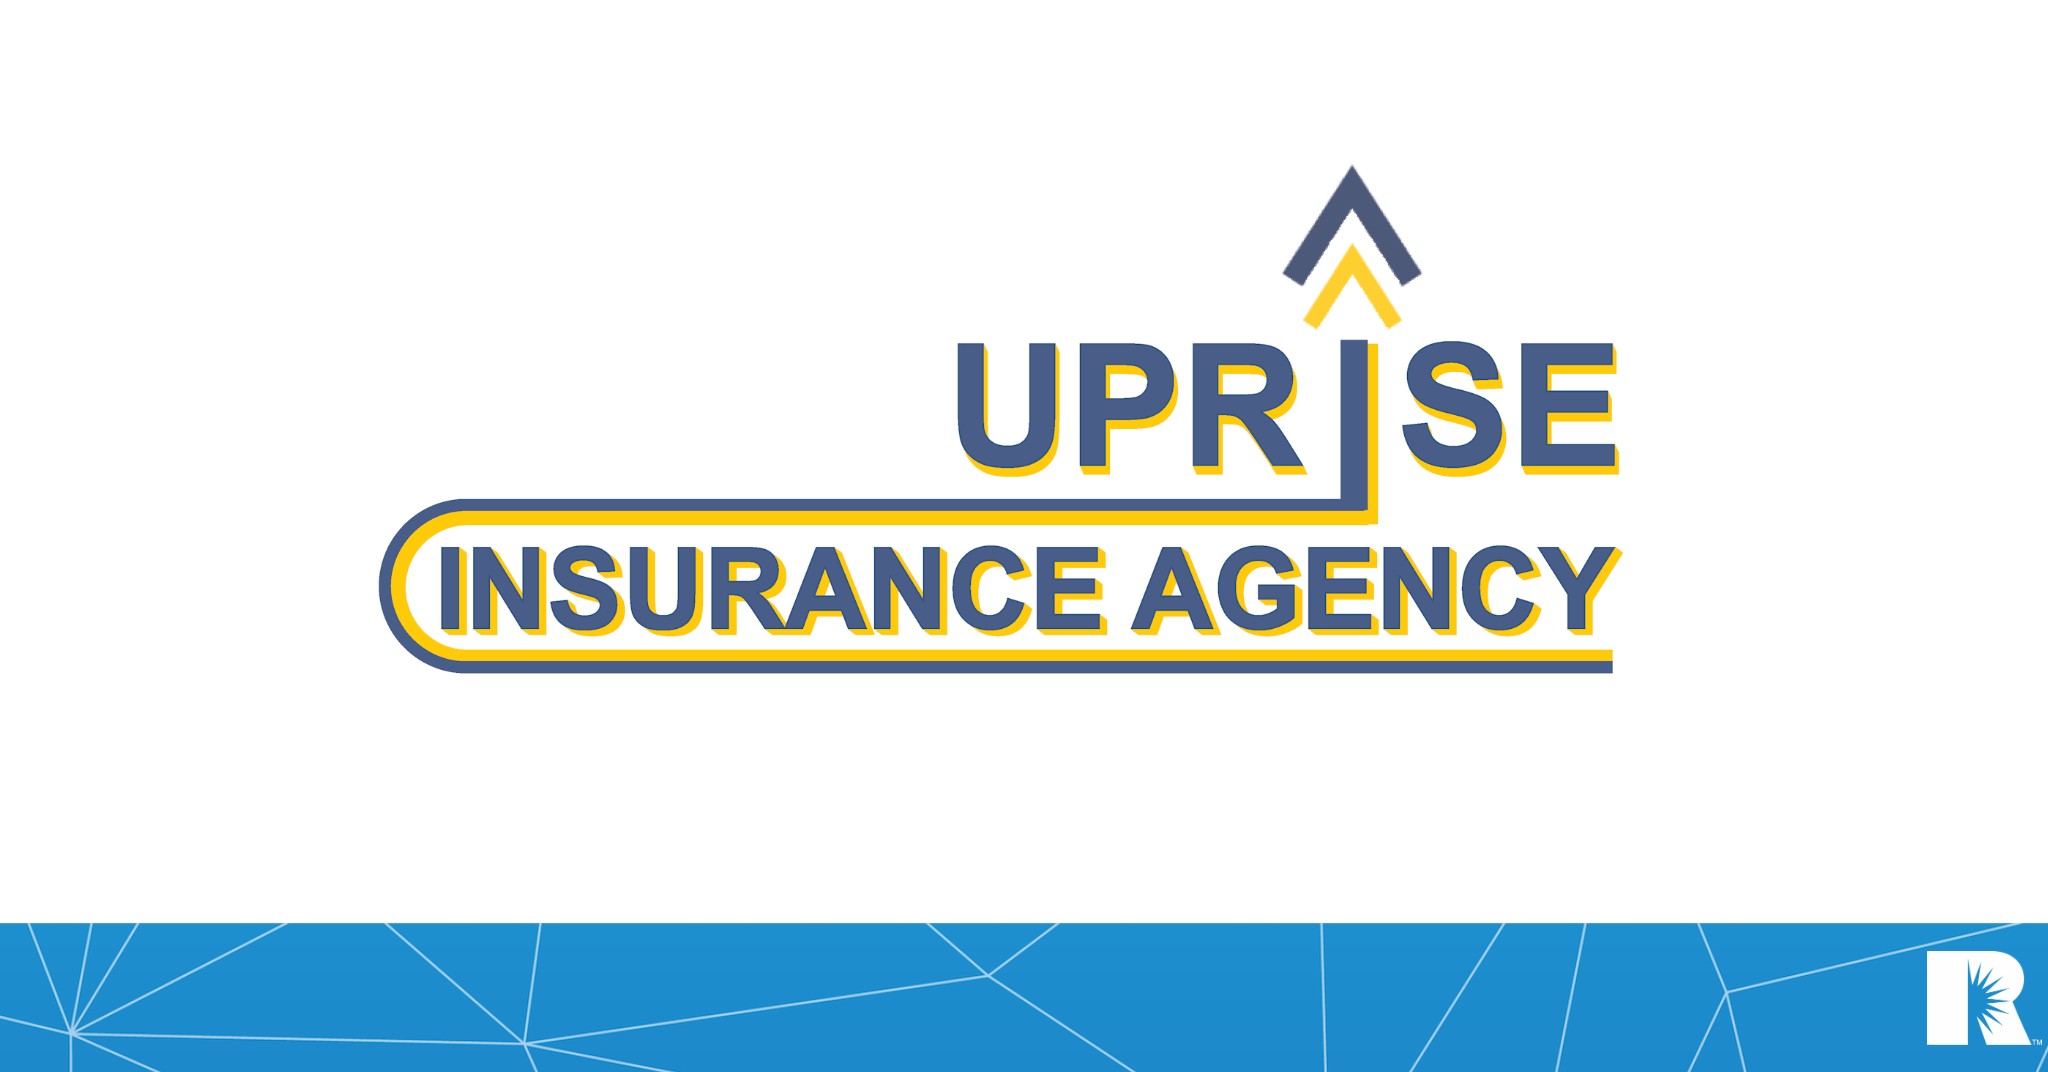 Business logo for the Uprise Insurance Agency.